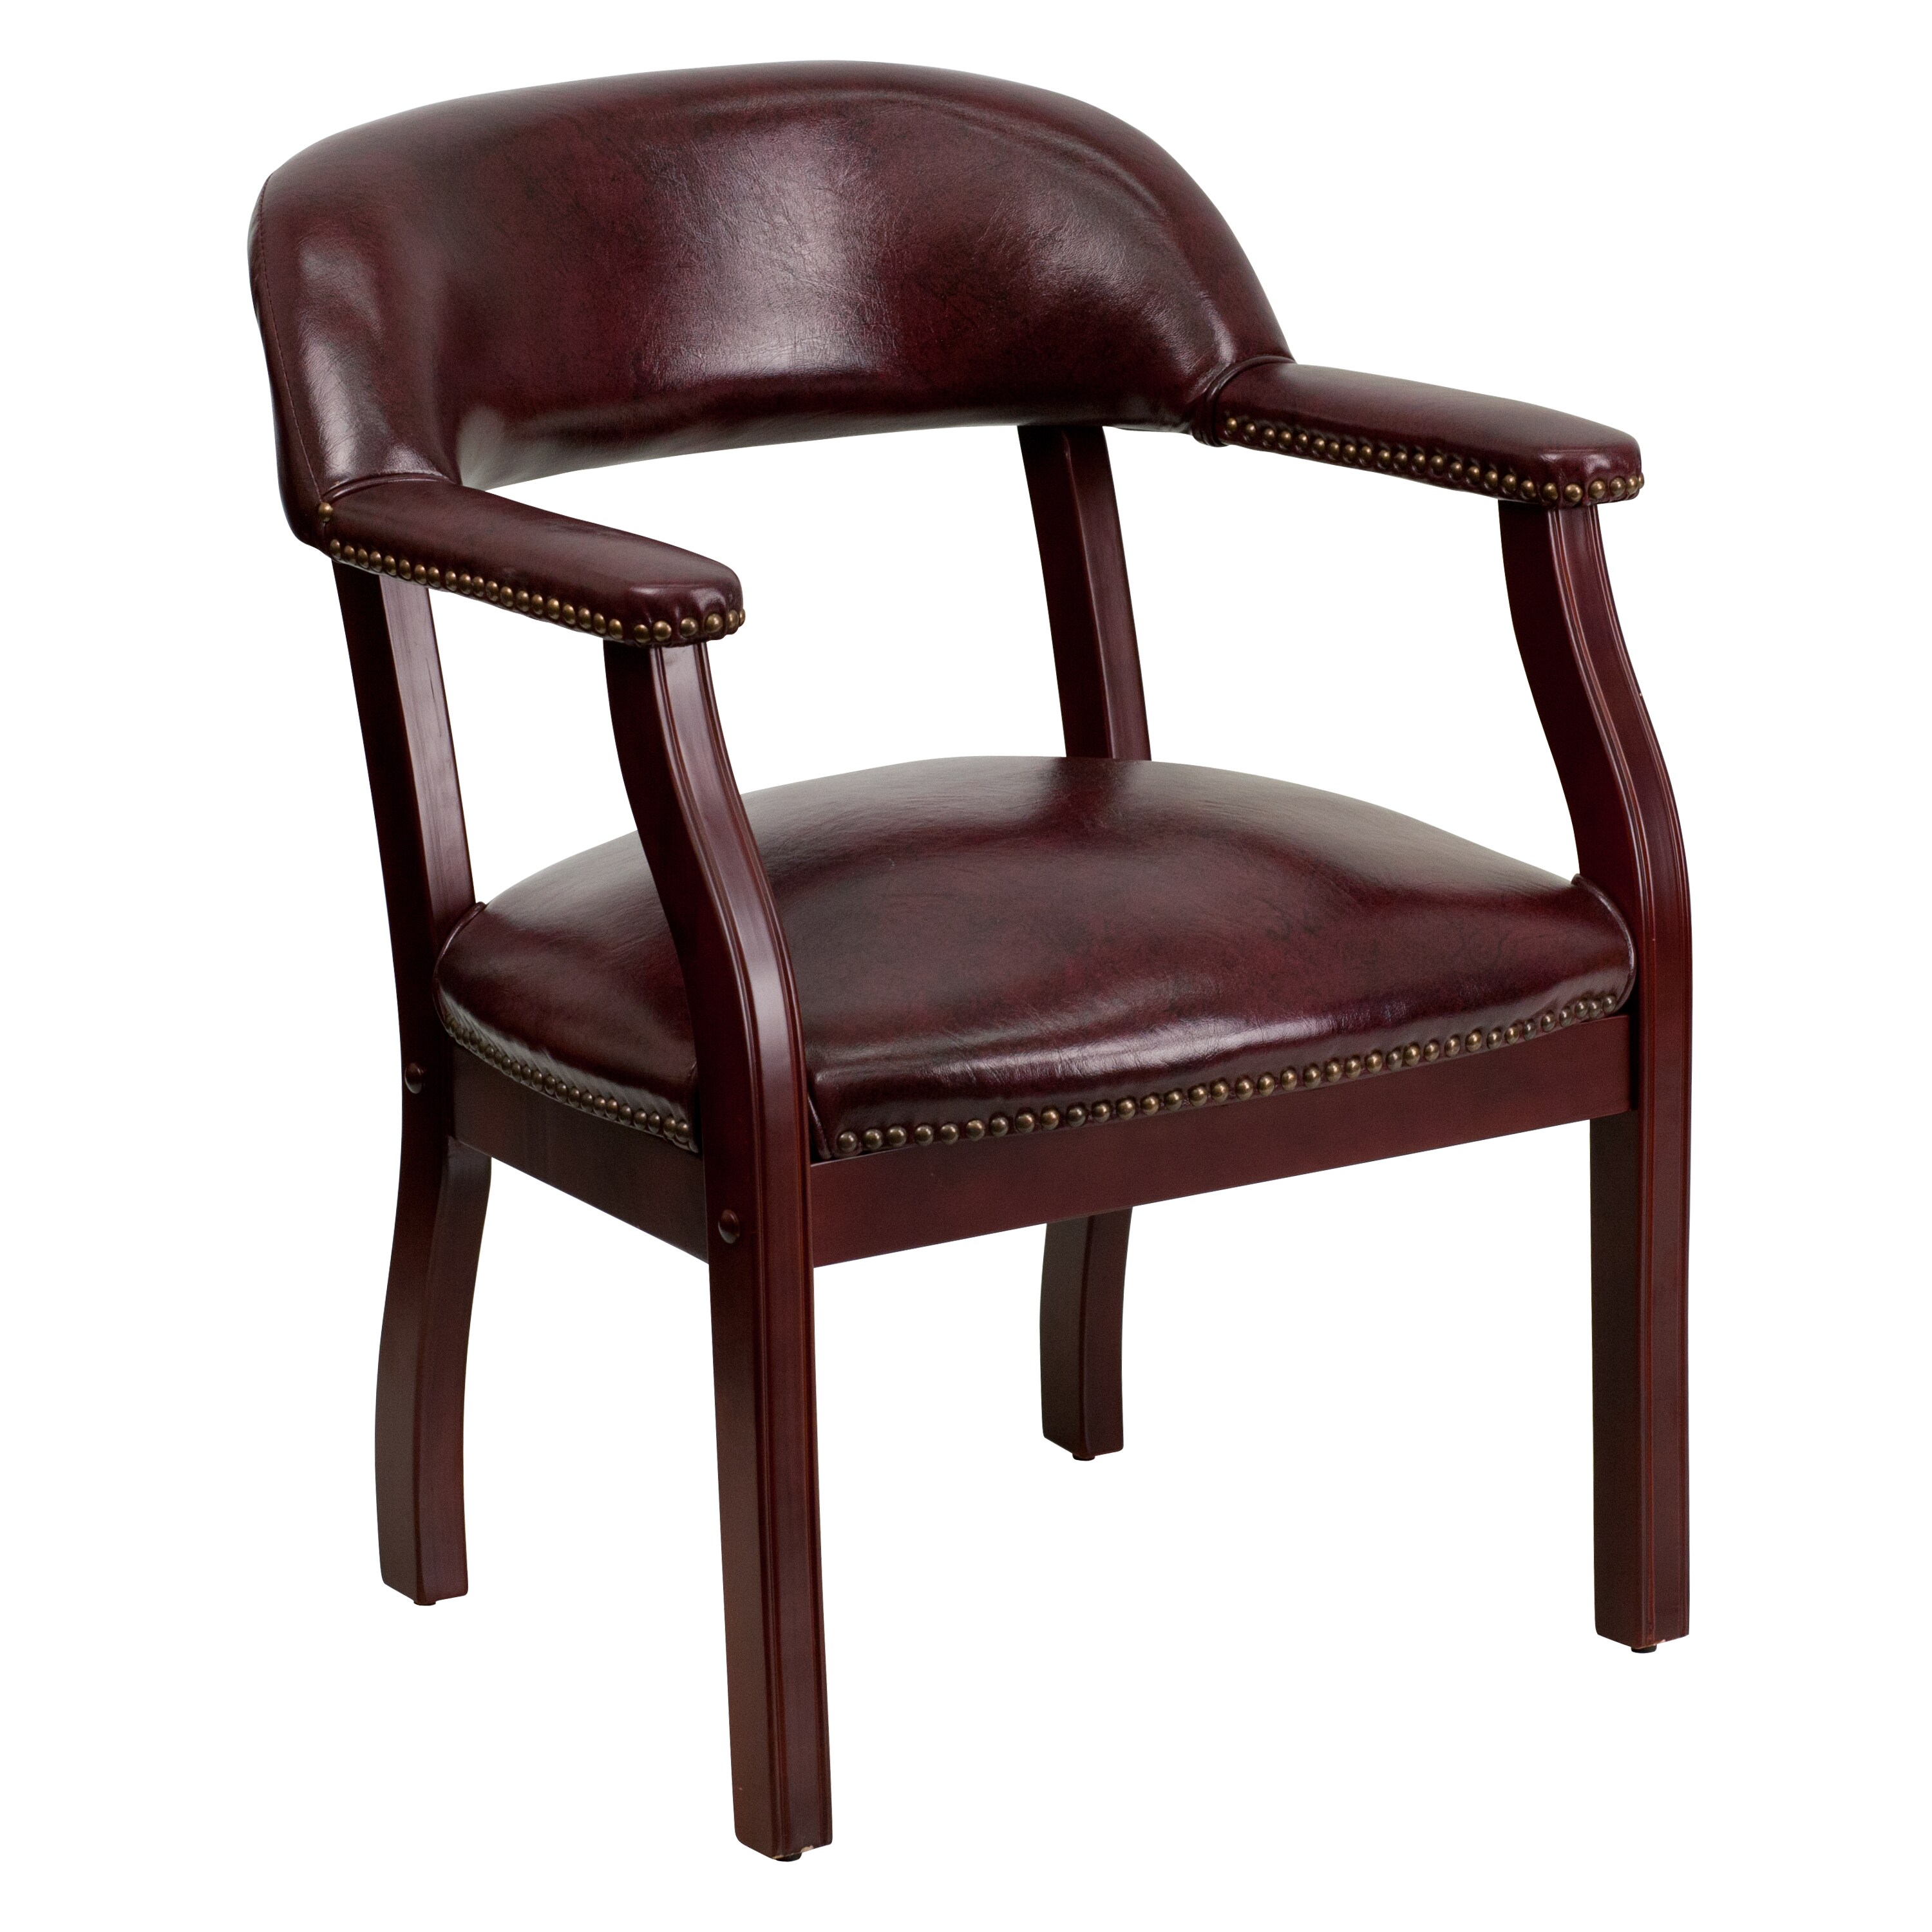 Flash Furniture Burgundy Leather Pillow Back Office Chair with Nailhead Trim